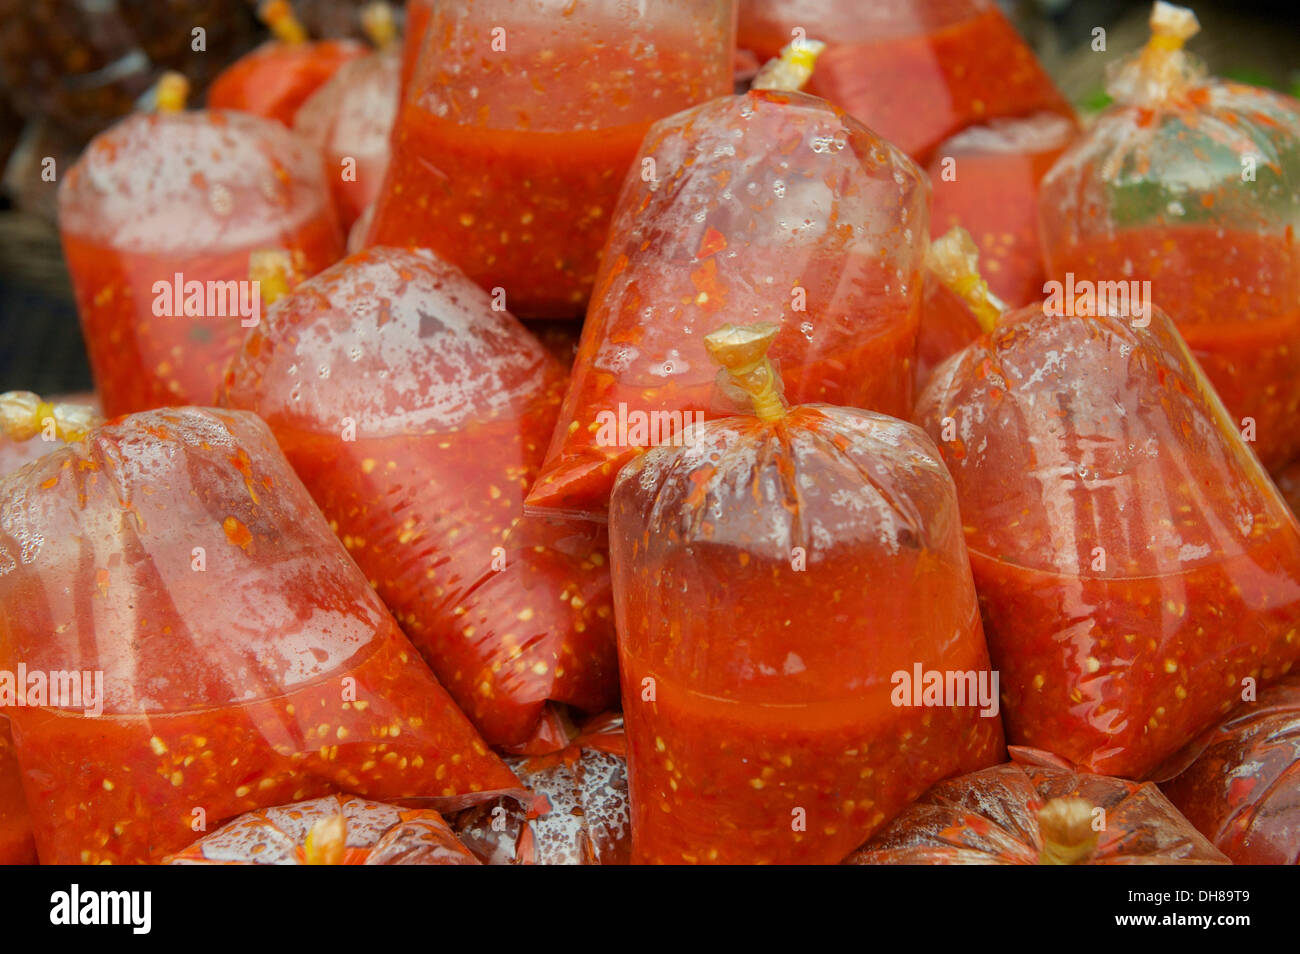 Chili sauce packed in plastic bags, at a market, Siem Reap, Siem Reap, Siem Reap Province, Cambodia Stock Photo